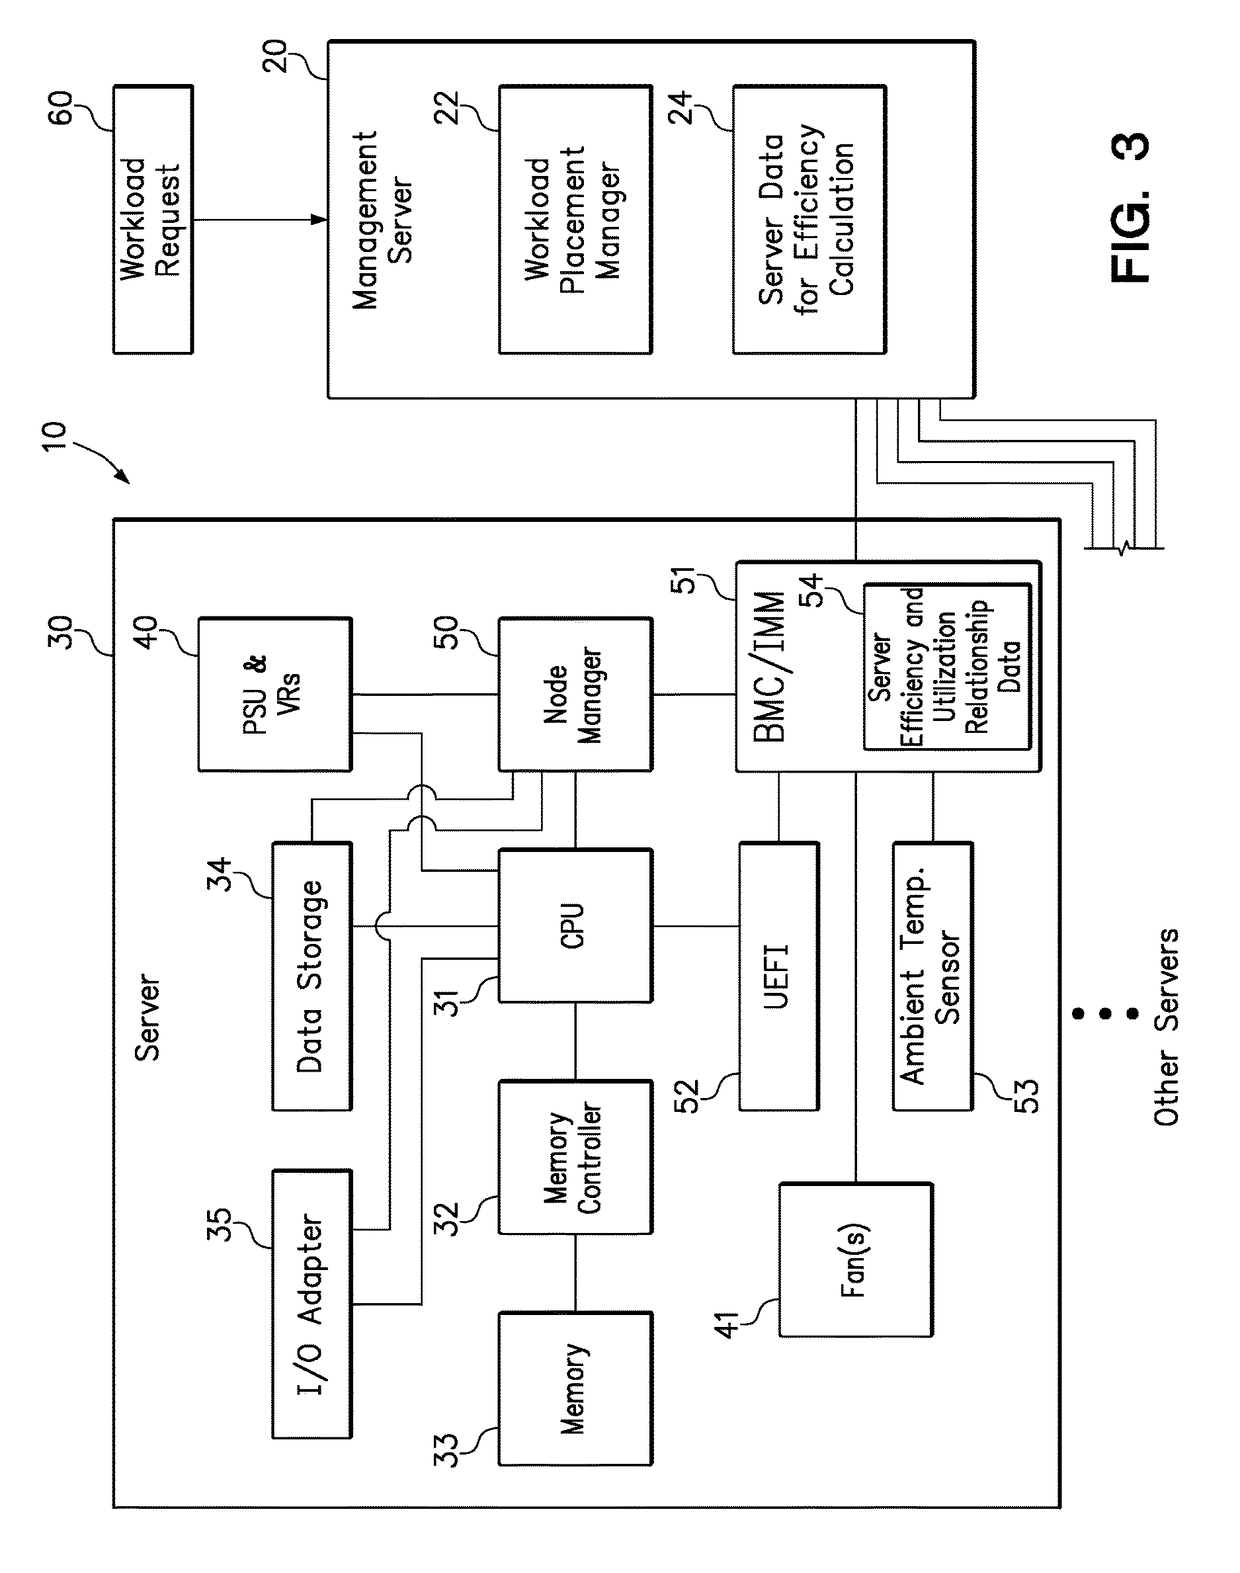 Energy efficient workload placement management using predetermined server efficiency data